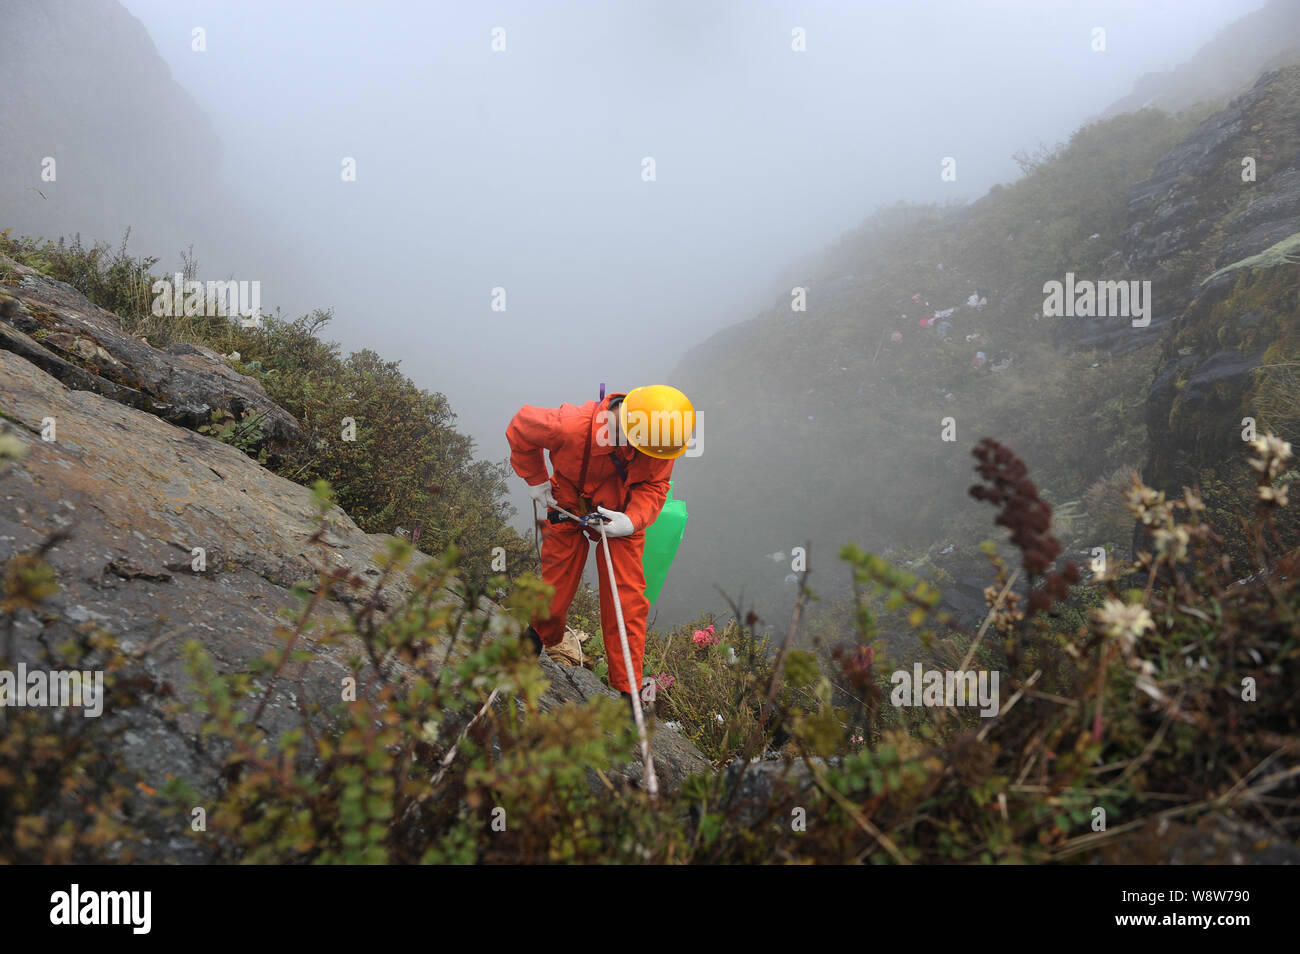 A Chinese cleaner climbs down a cliff to collect garbage on the Golden Summit of Mount Emei (Emei Mountain) during the National Day holidays in Emeish Stock Photo